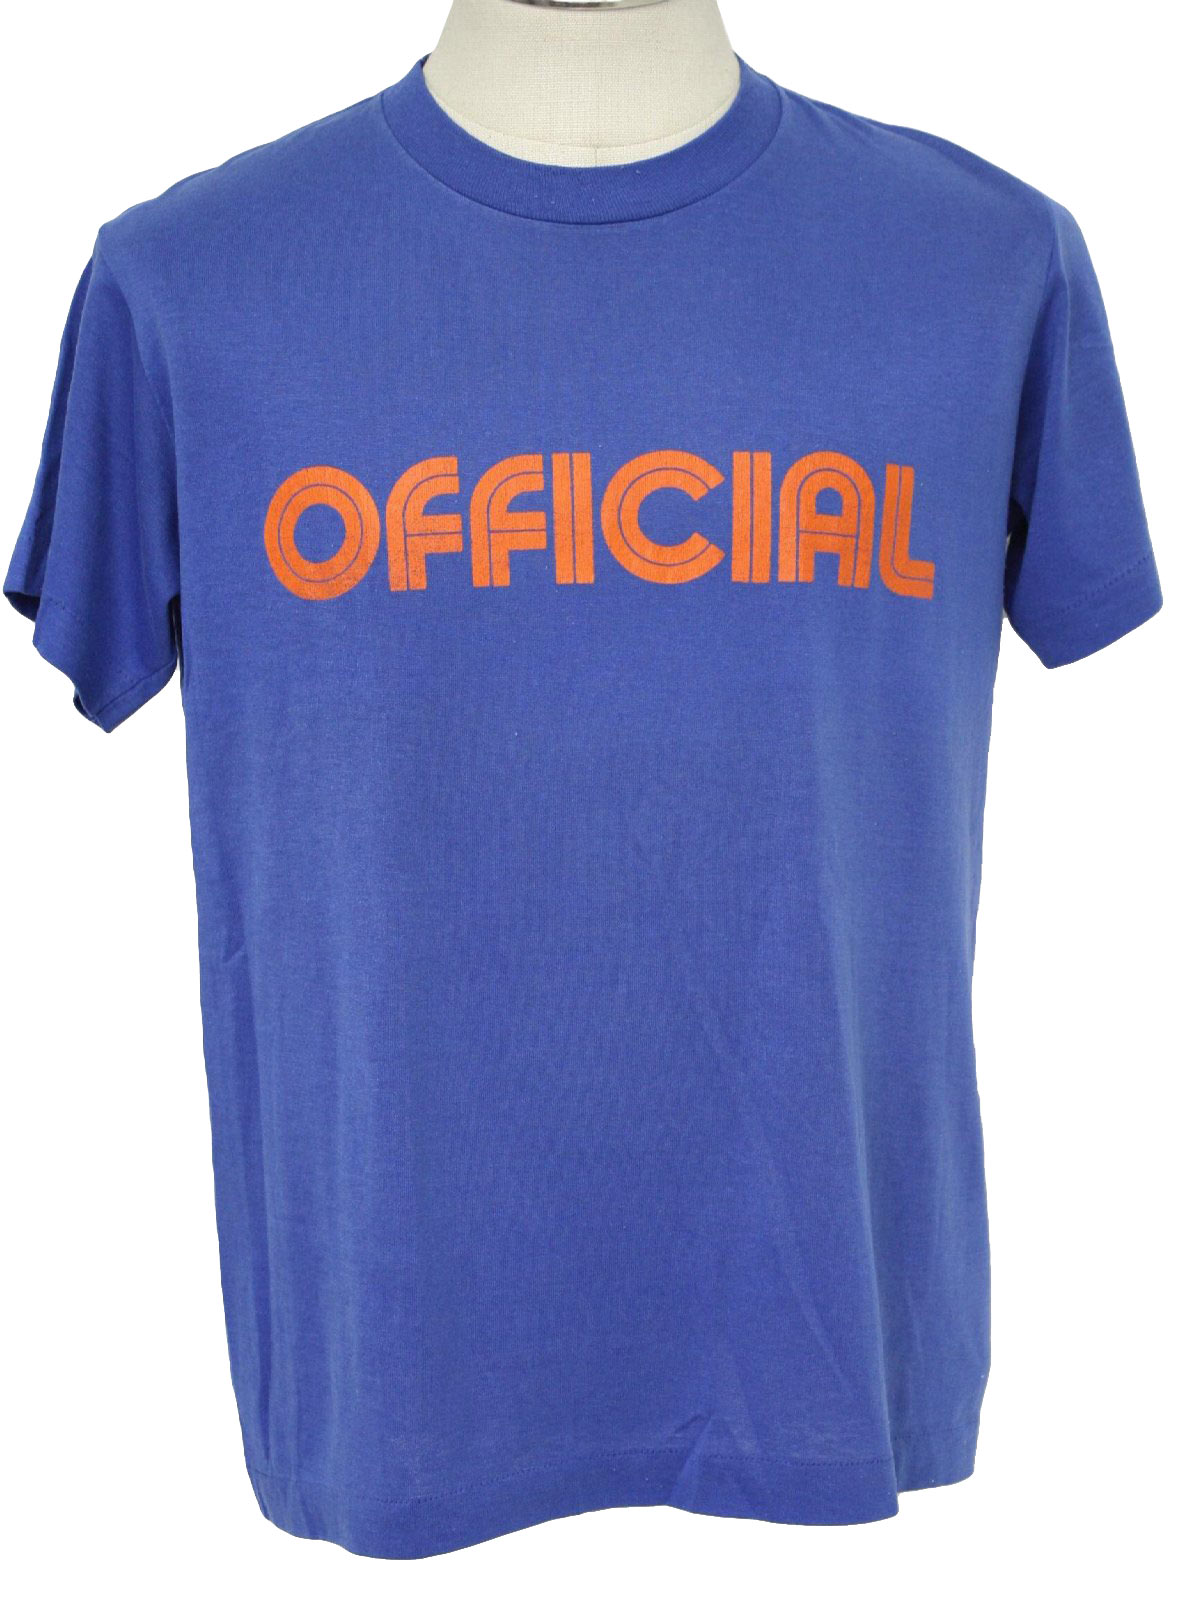 Vintage 80s T Shirt: 80s -Nike- Mens well worn blue and orange soft ...